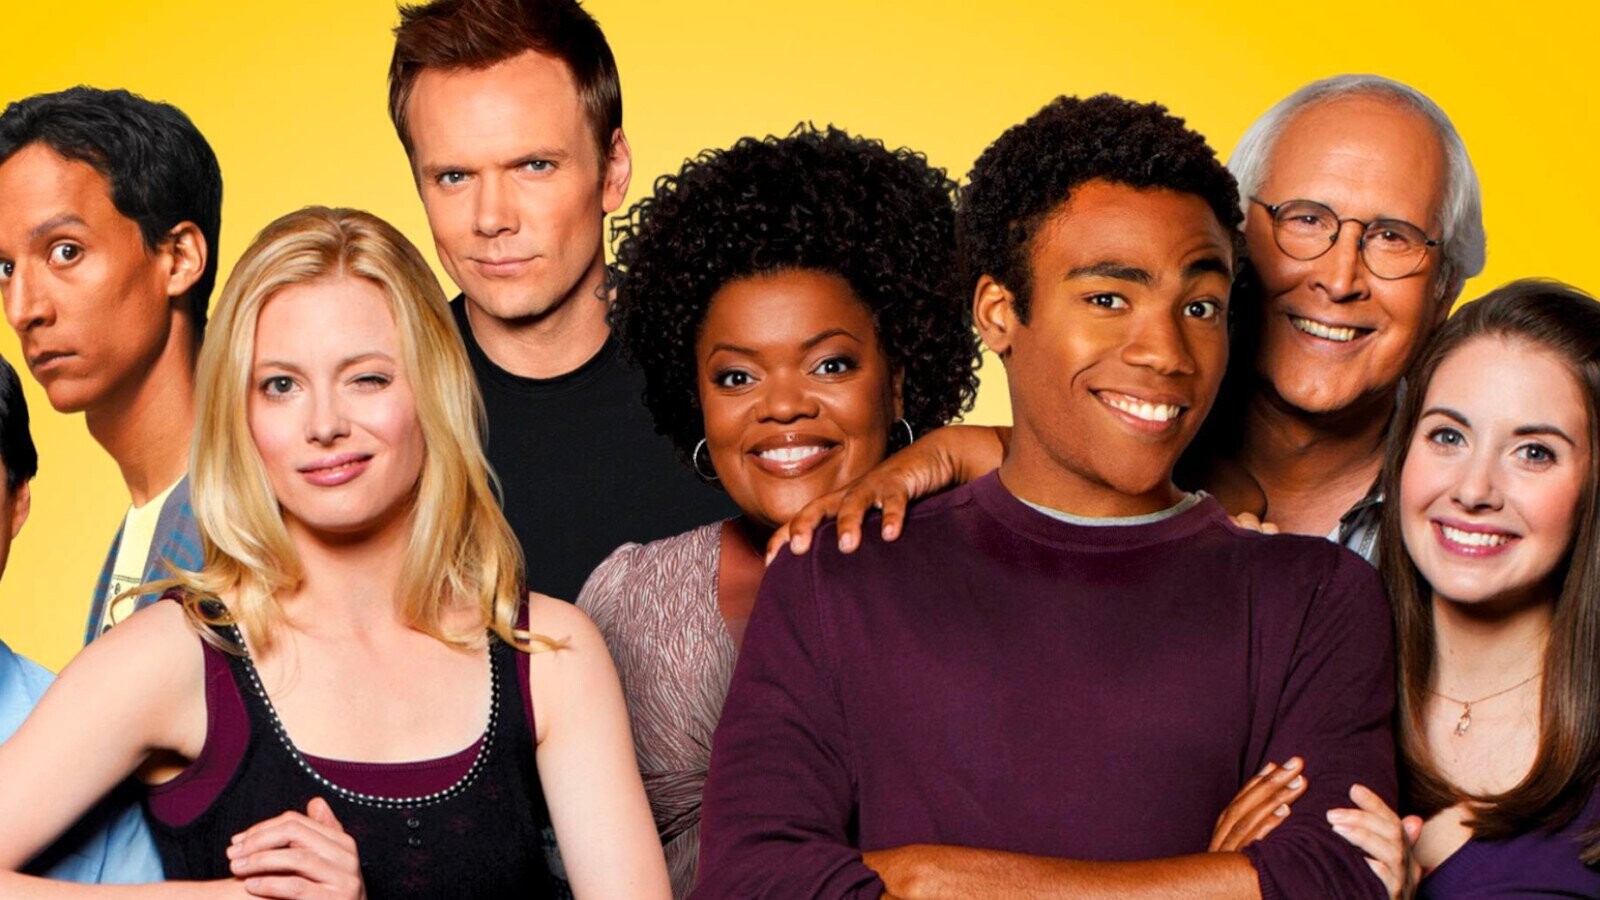 Why The 'Community' Movie Could Be About Battling (Literal) Pirates